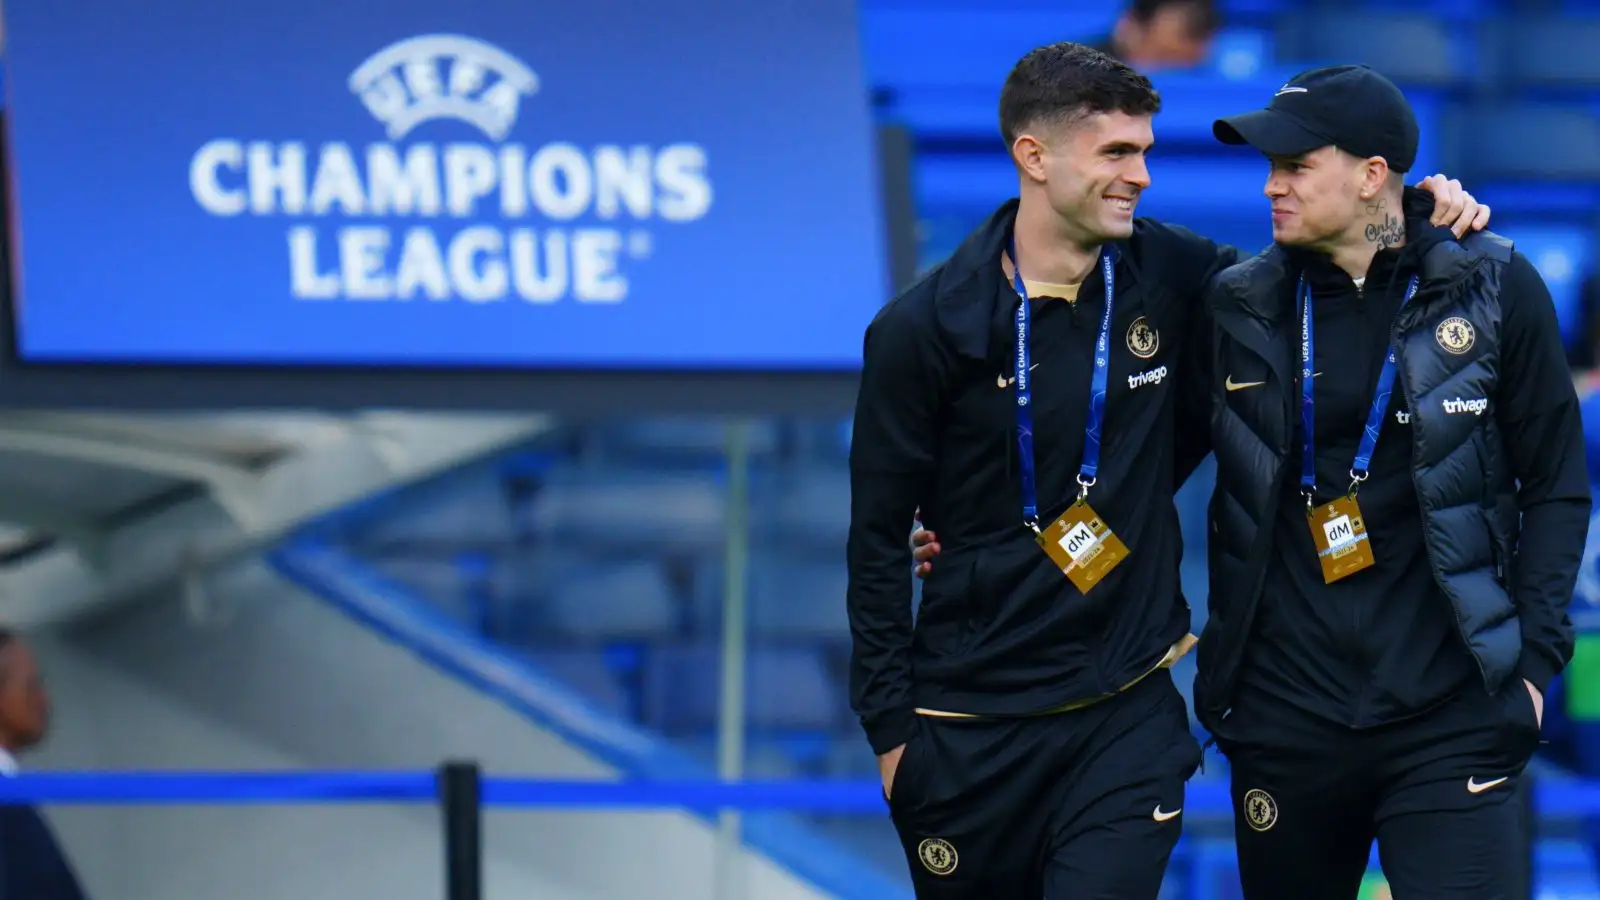 Chelsea duo Christian Pulisic and Mykhaylo Mudryk before a Champions League match.